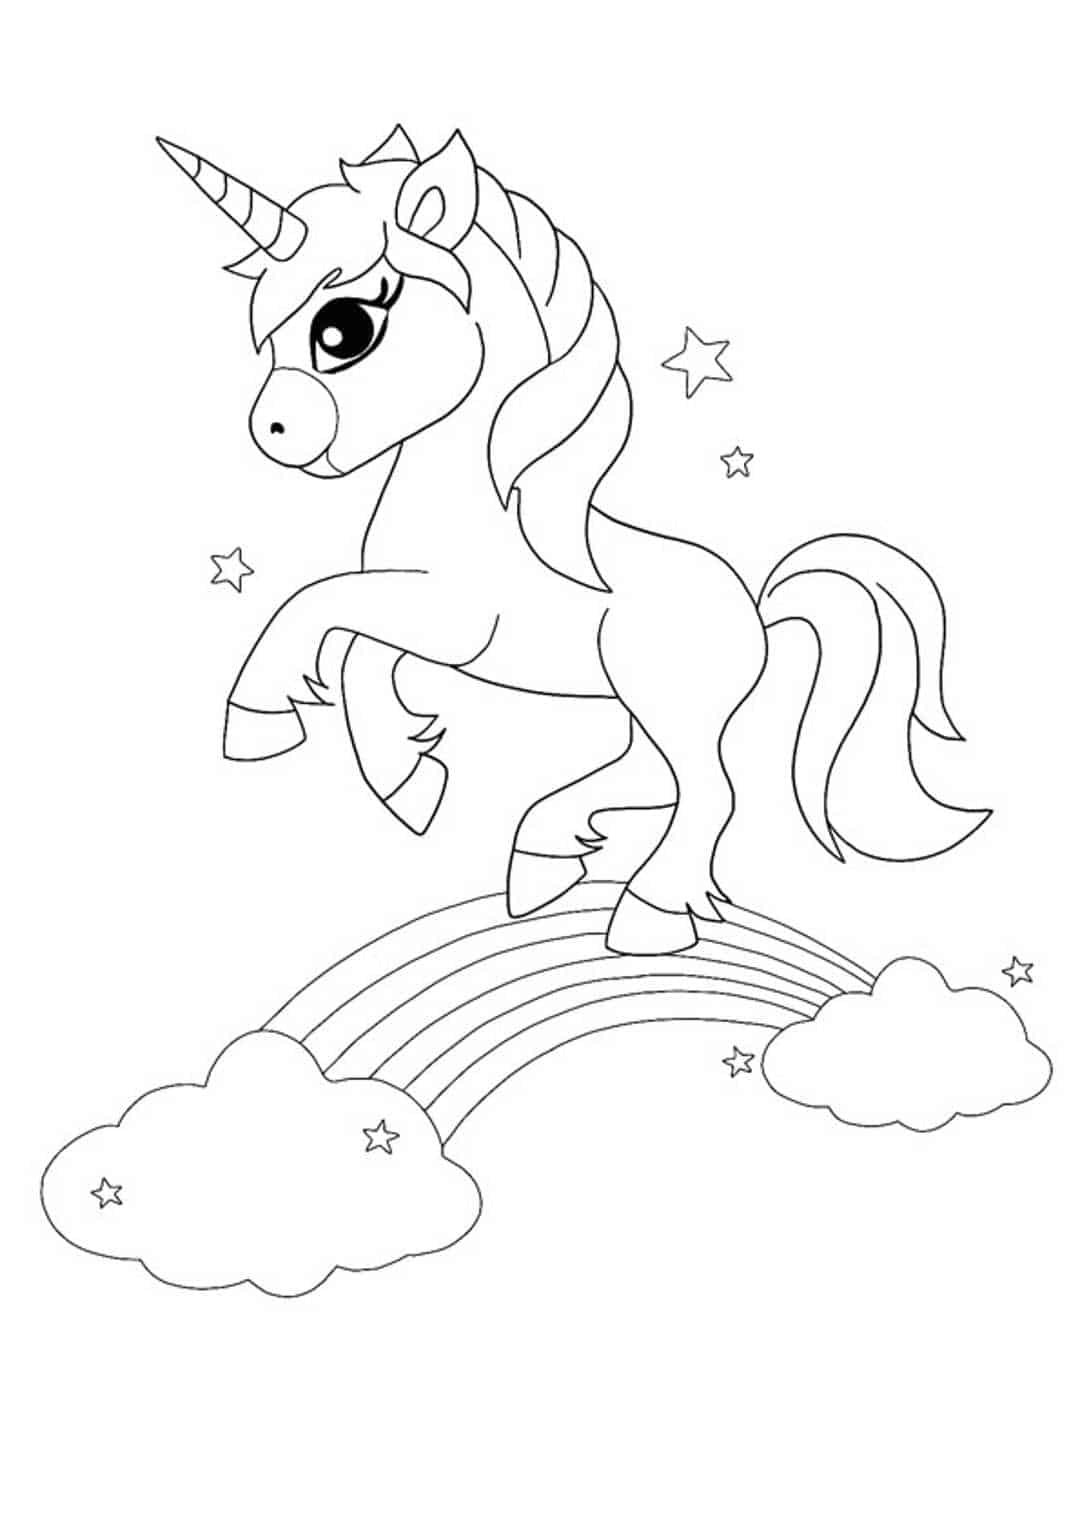 Cute magical unicorn and rainbow coloring page